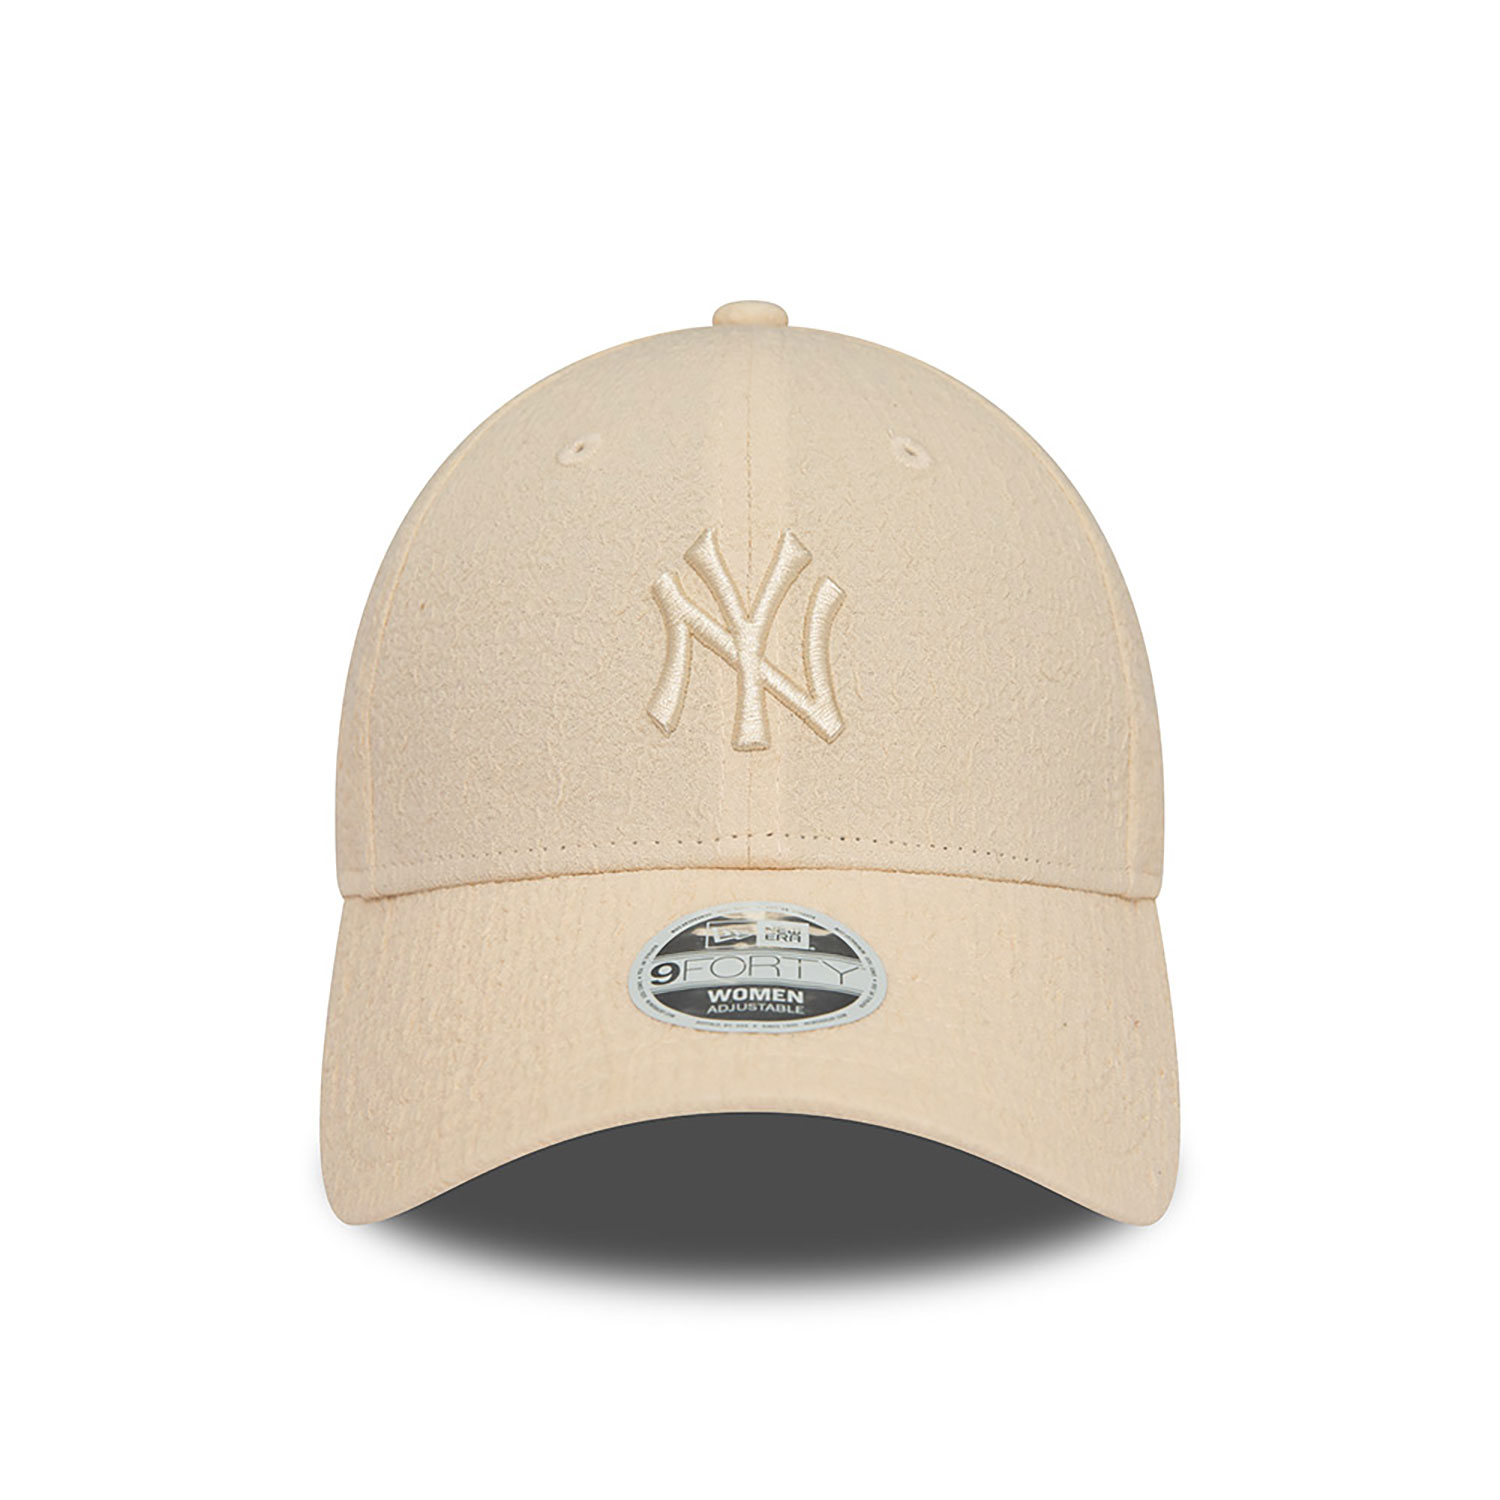 New York Yankees Womens Bubble Stitch Stone 9FORTY Adjustable Cap